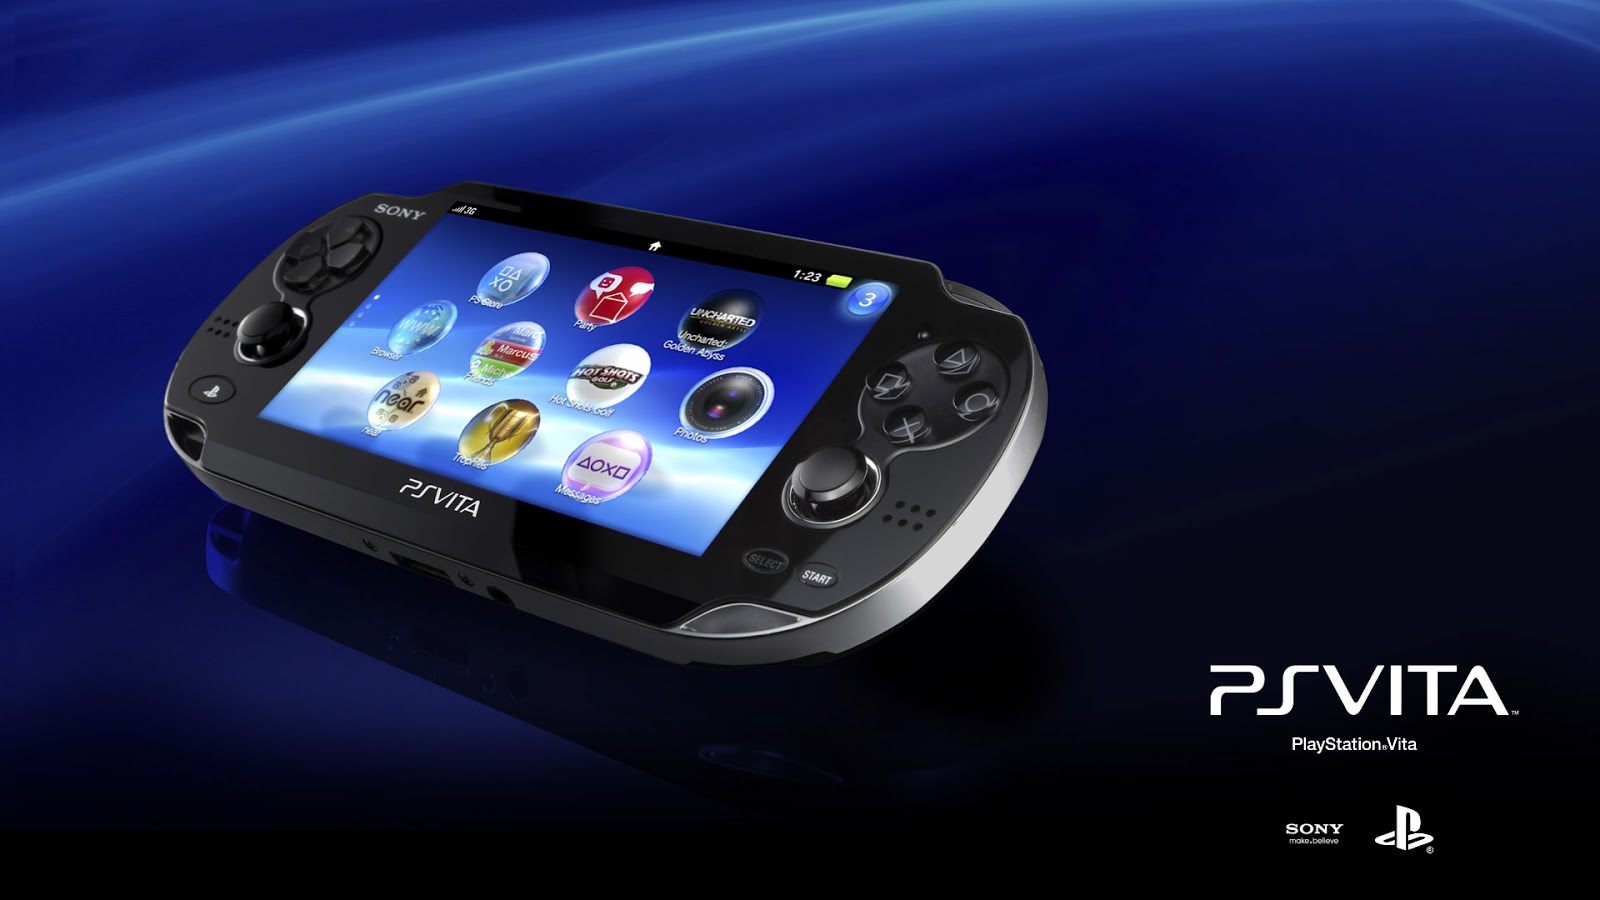 ps vita emulator for android apk free download